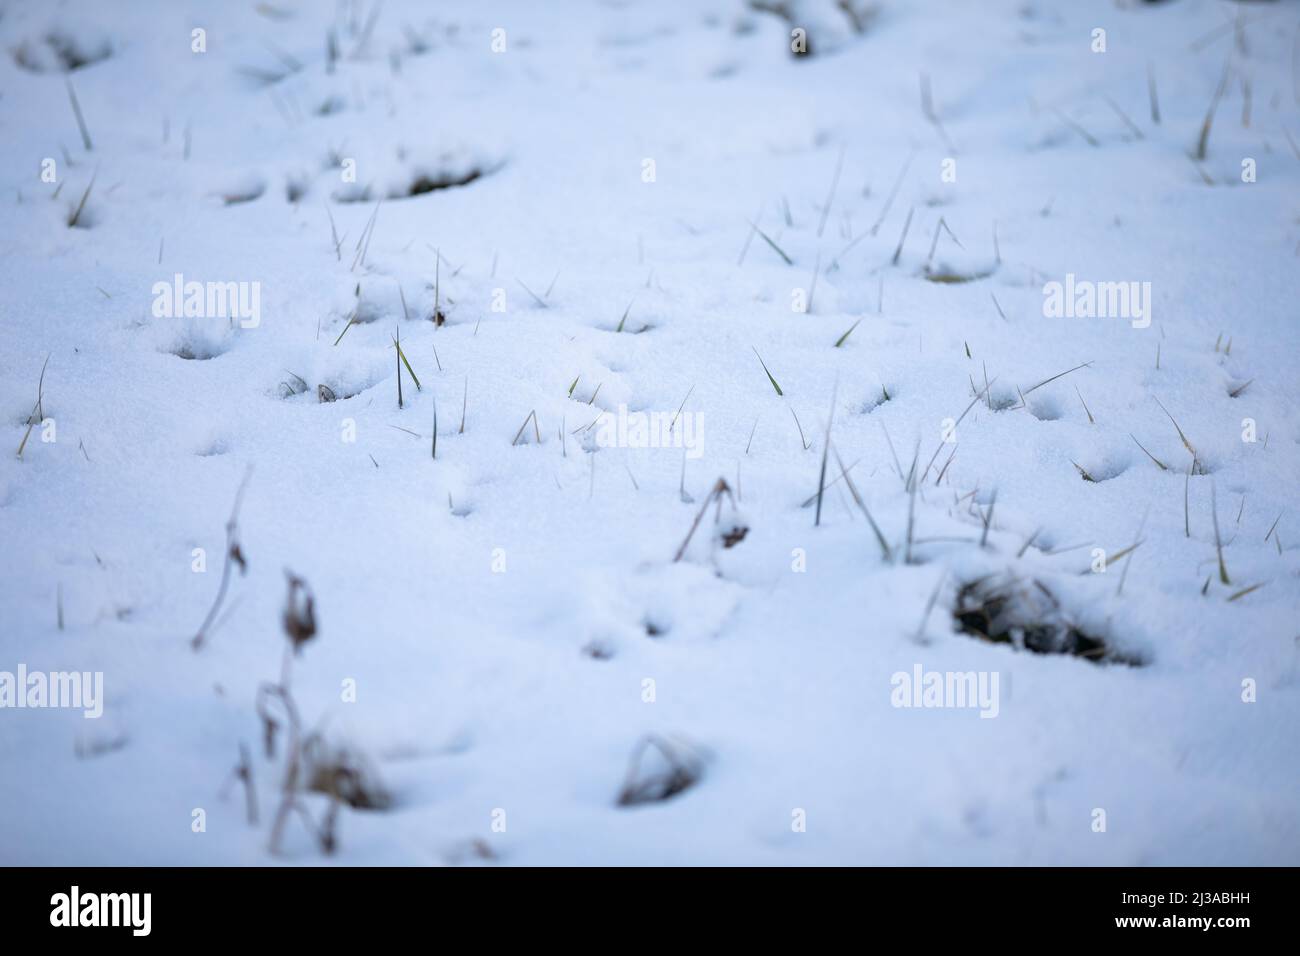 Dried blades of grass and forbs sticking out from under a layer of snow. Stock Photo